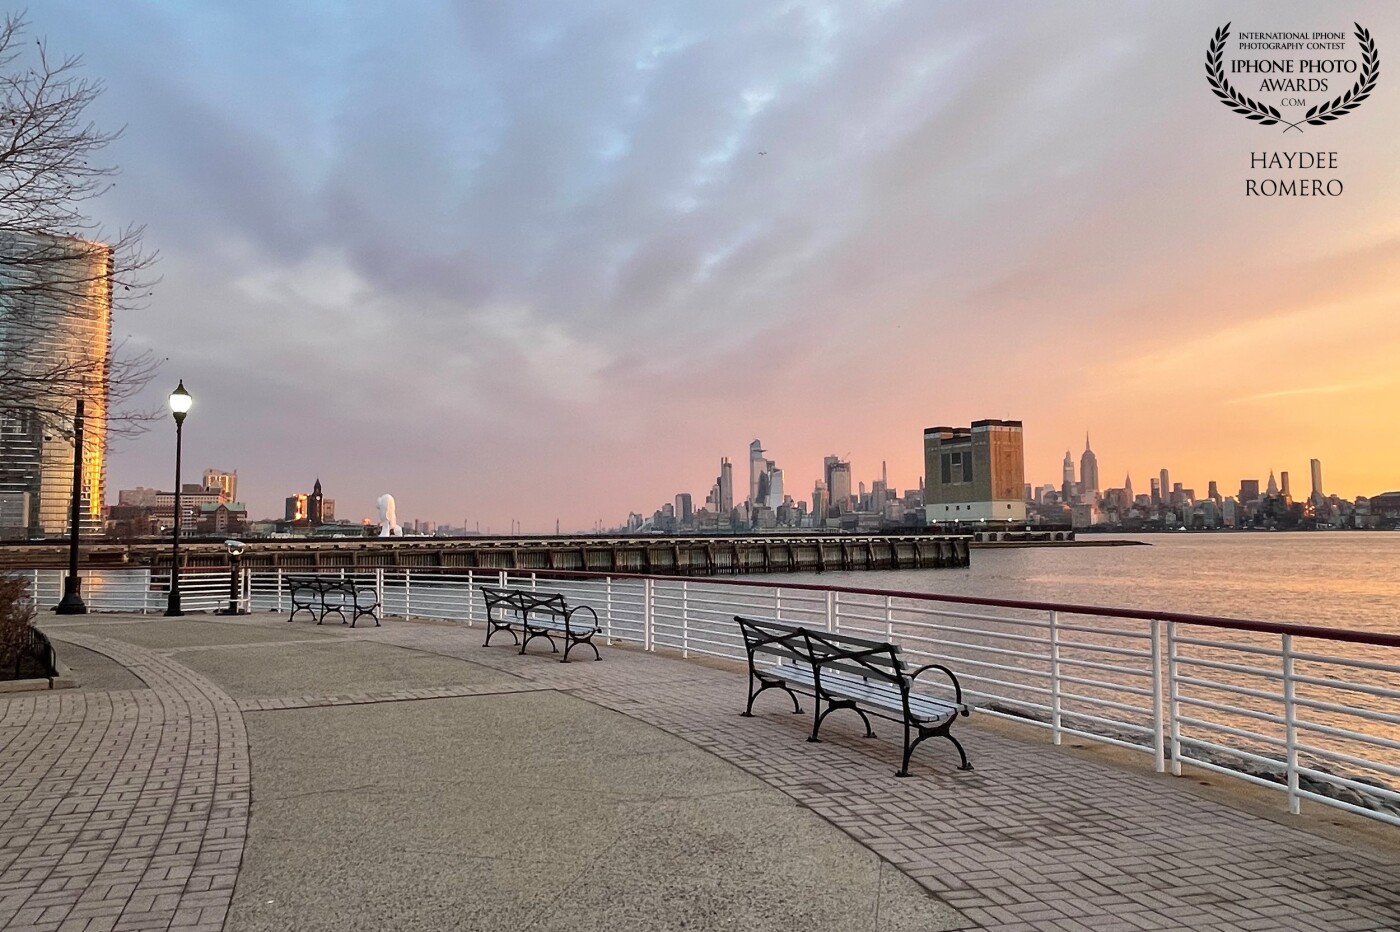 The morning sky blankets Manhattan and its skyscrapers, including the iconic Empire State Building in midtown New York, as seen from the waterfront walkway of Jersey City on a recent winters day.